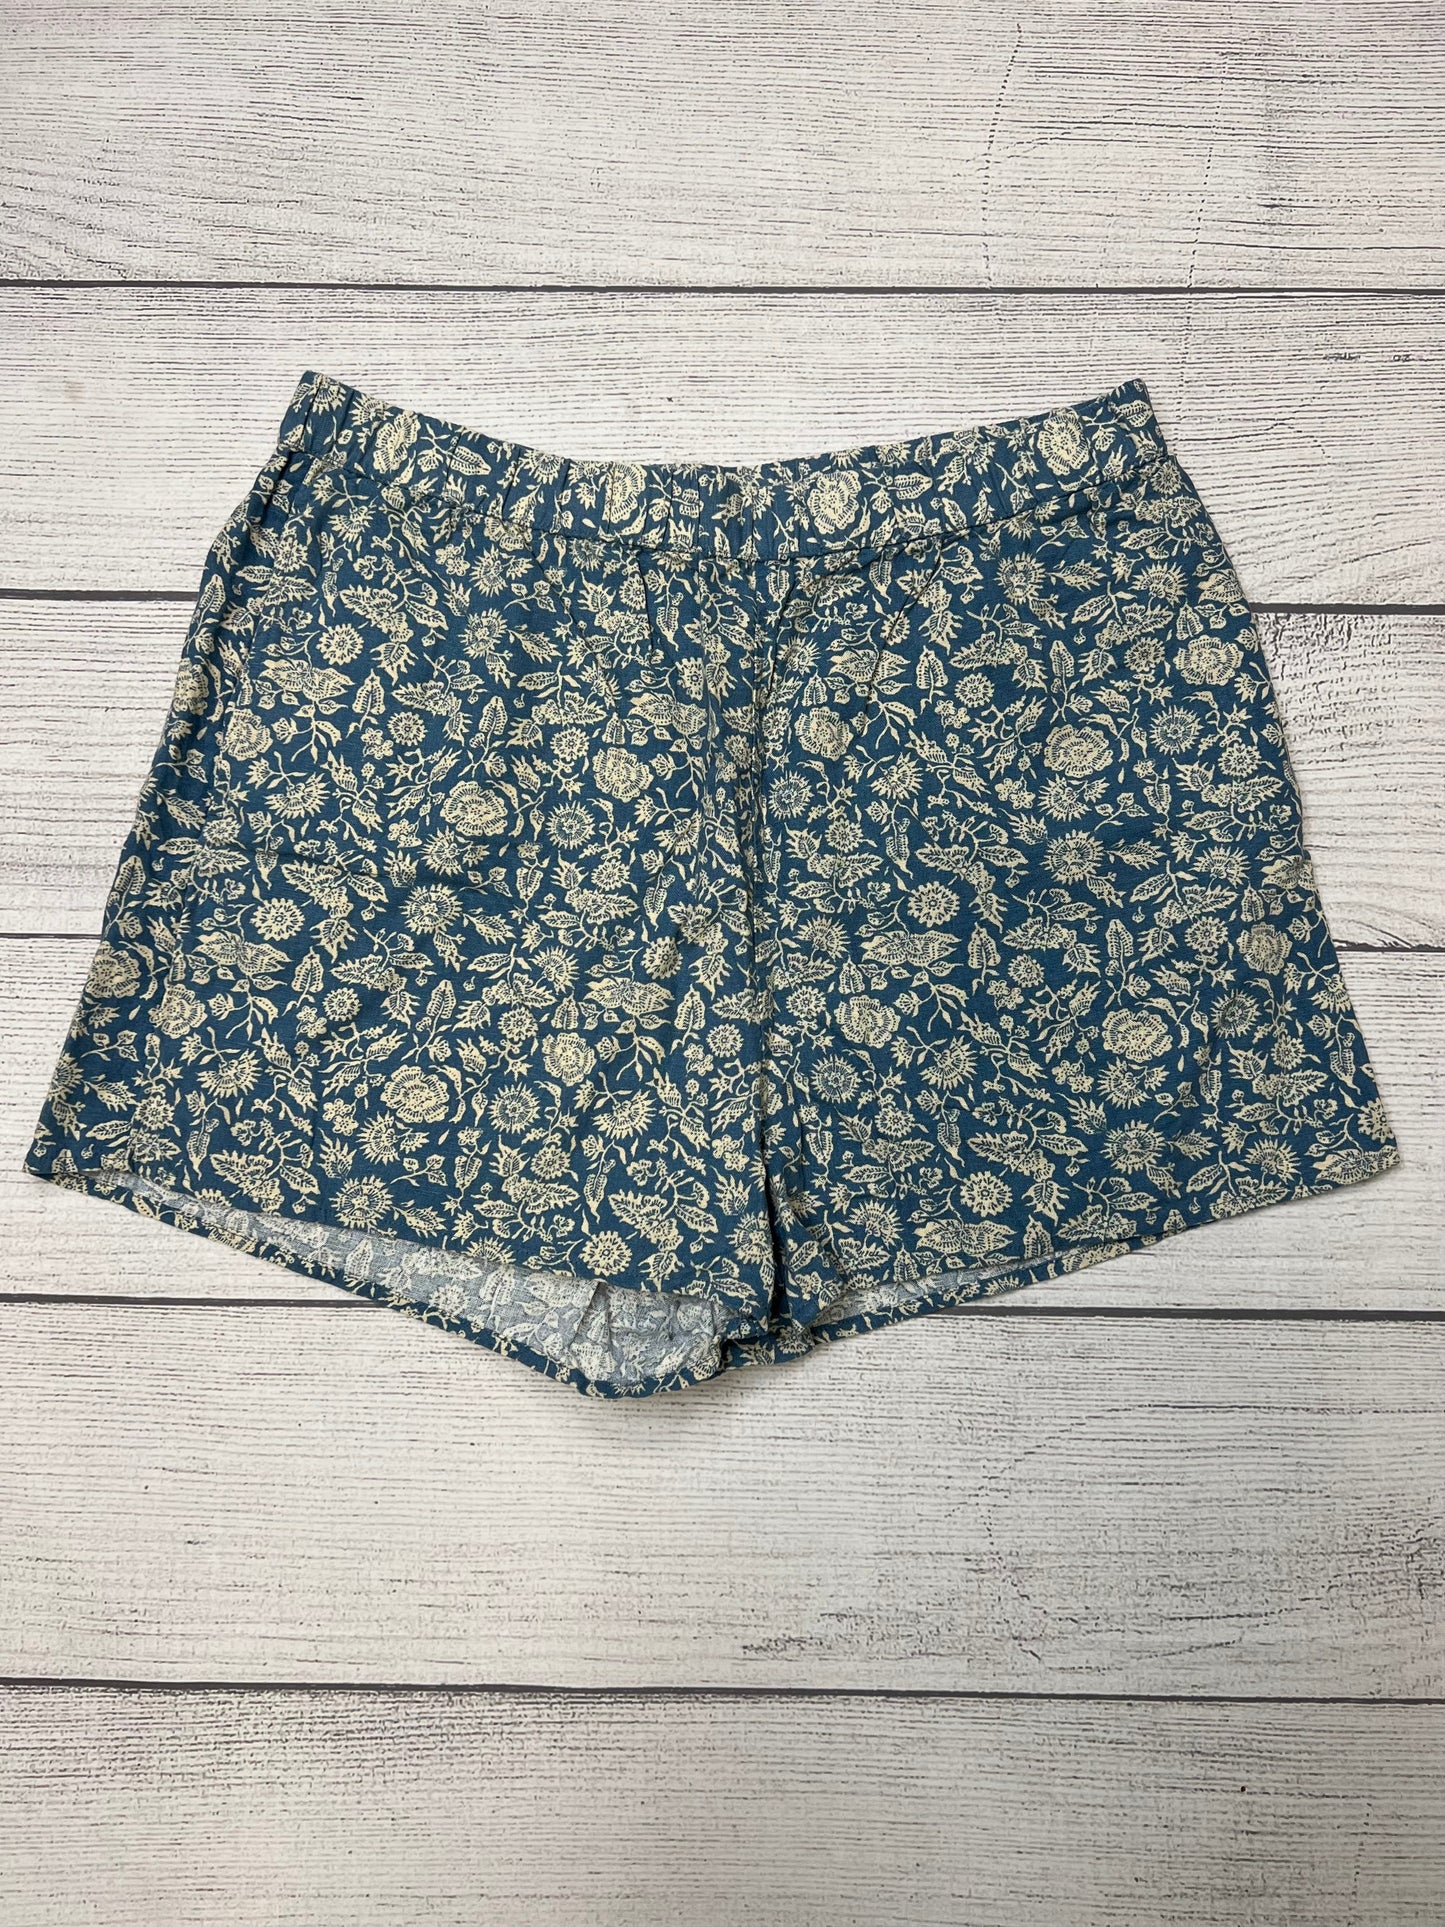 Shorts By Universal Thread  Size: Xl